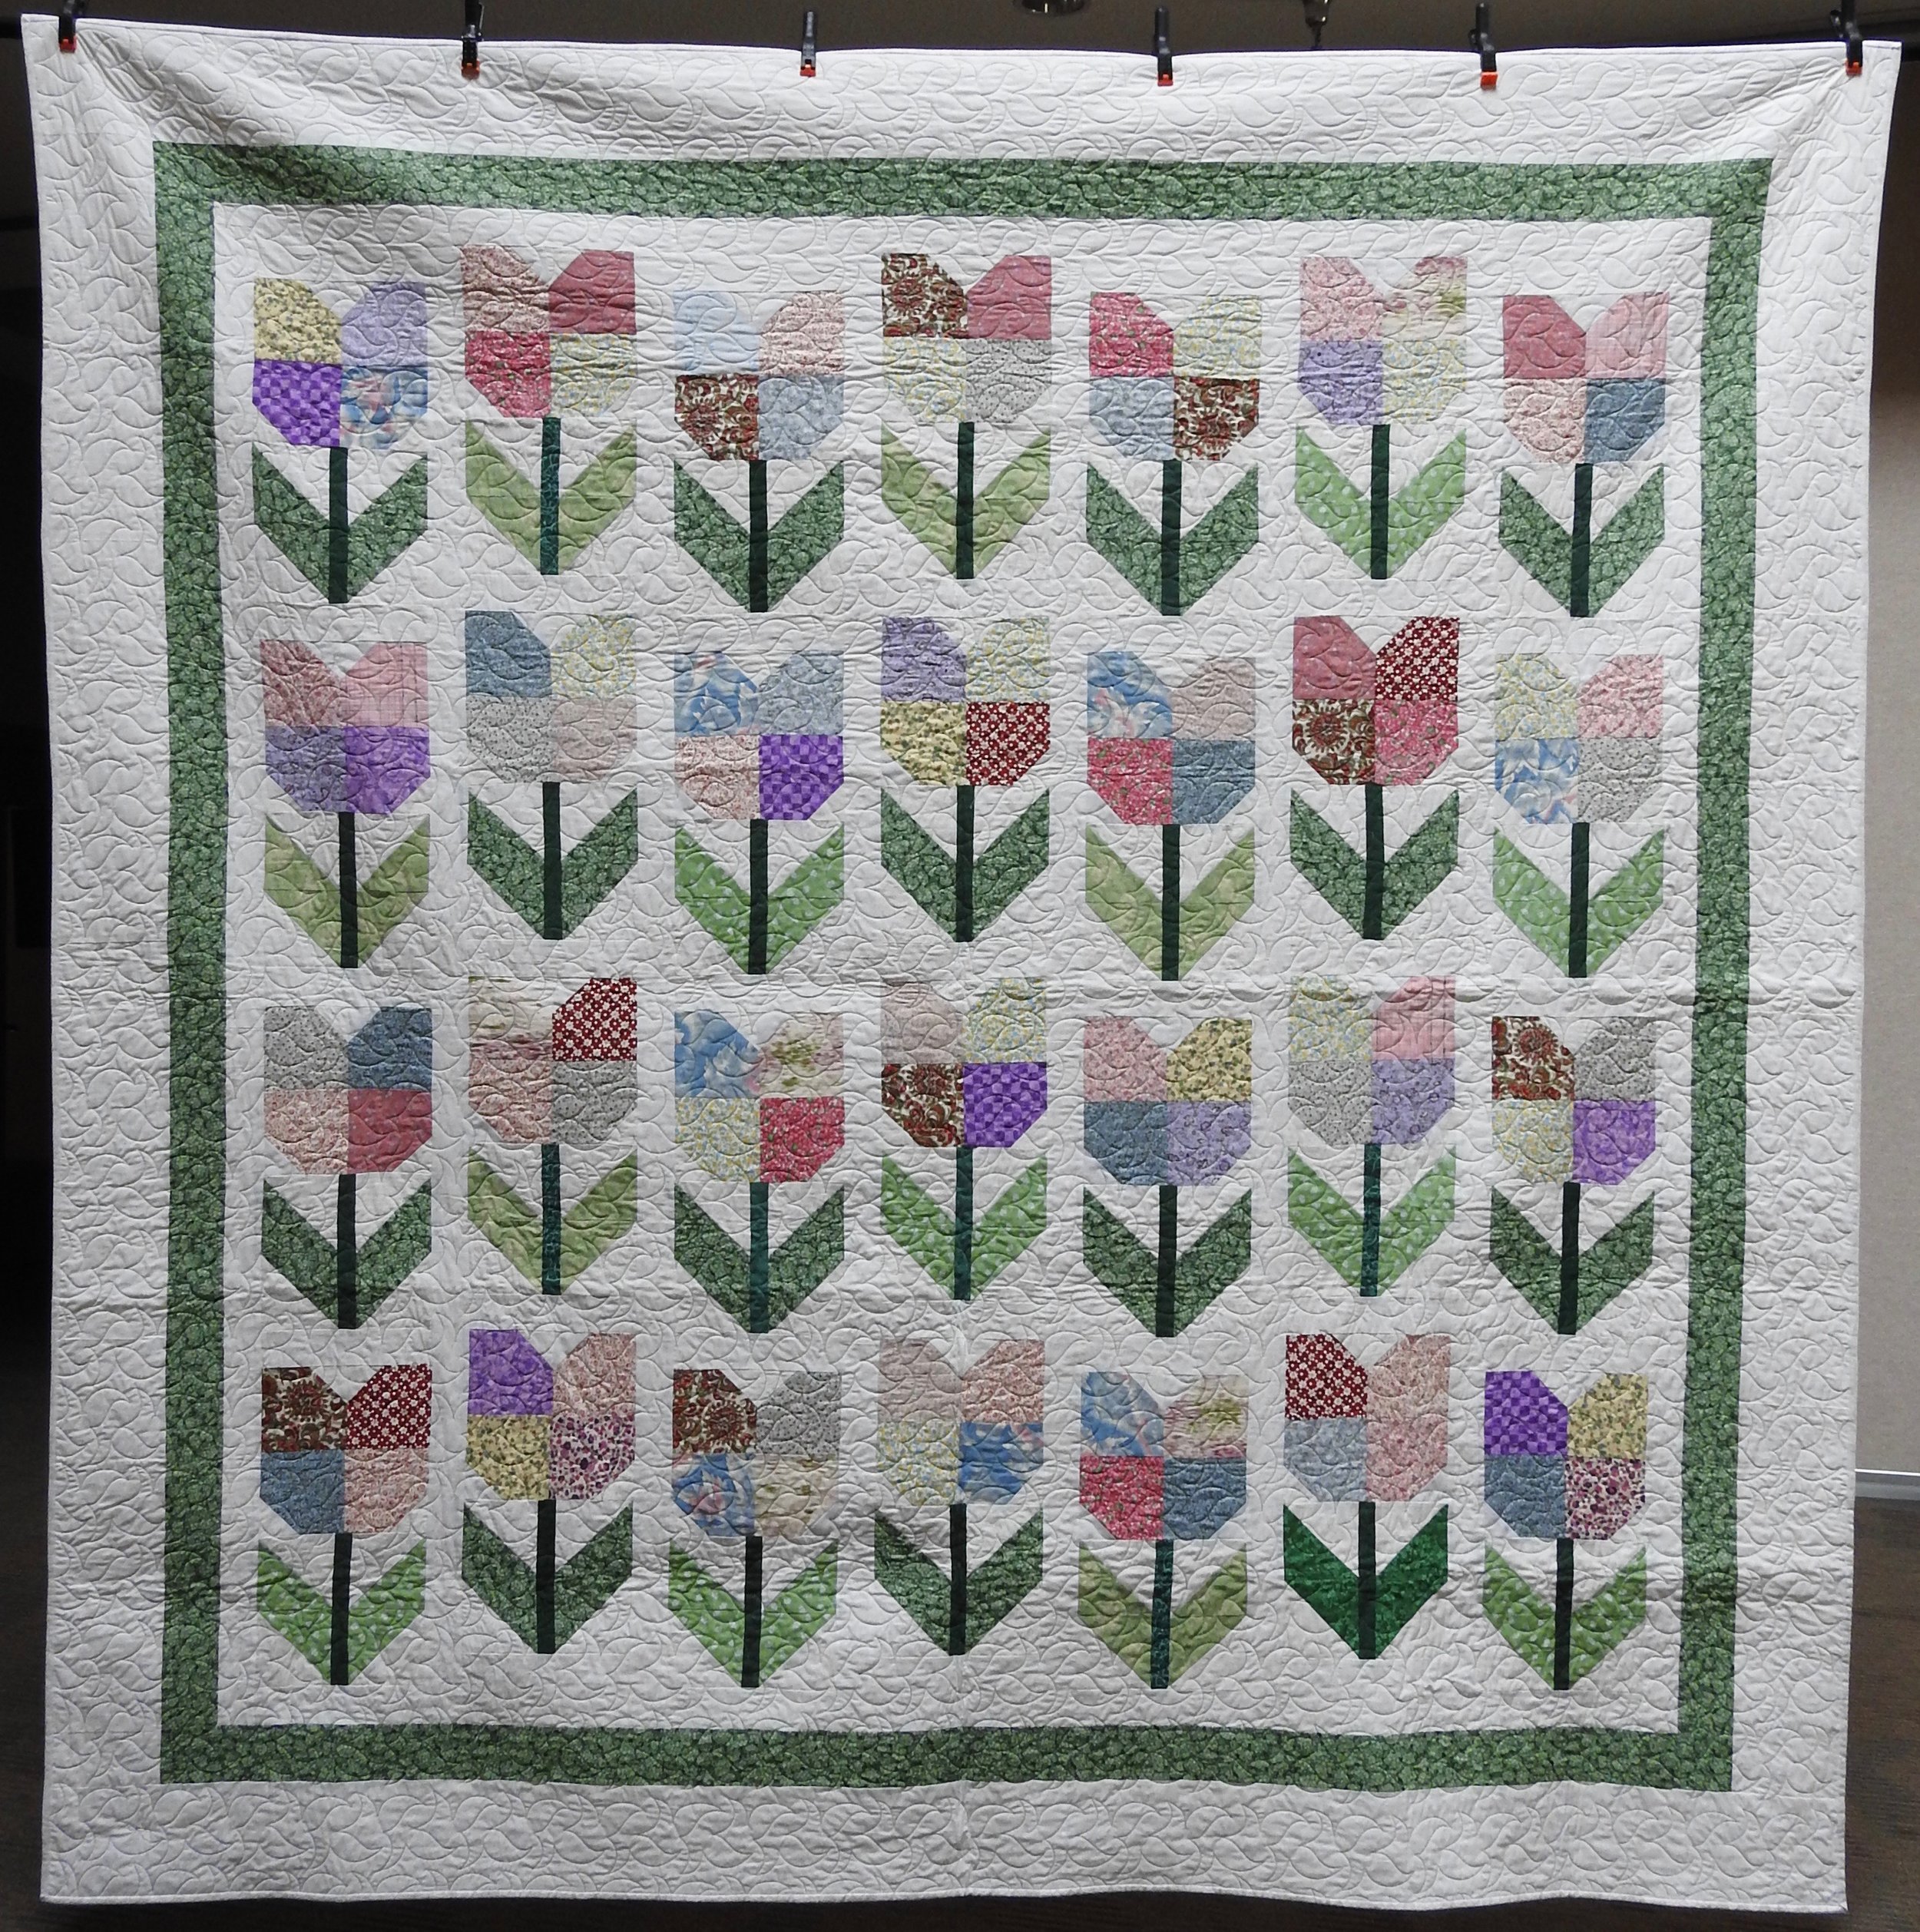 Totally Tulips, Pieced by Ruby Bontreger, Edge to Edge Machine Quilted, Signed &amp; Dated, donated by First Mennonite, Middlebury, 96 x 96”